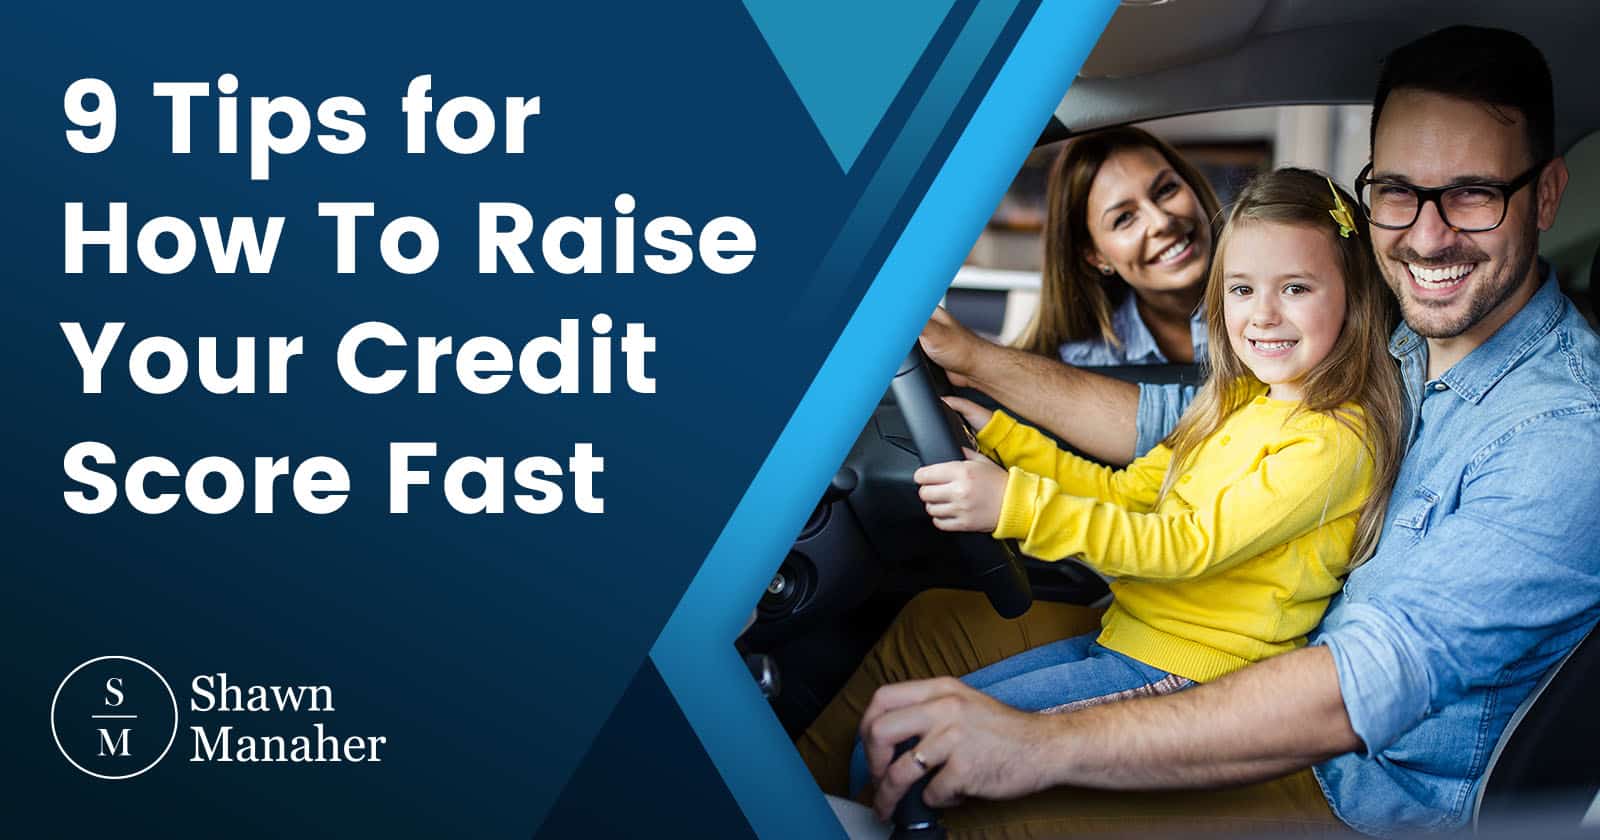 9 Tips For How To Raise Your Credit Score Fast